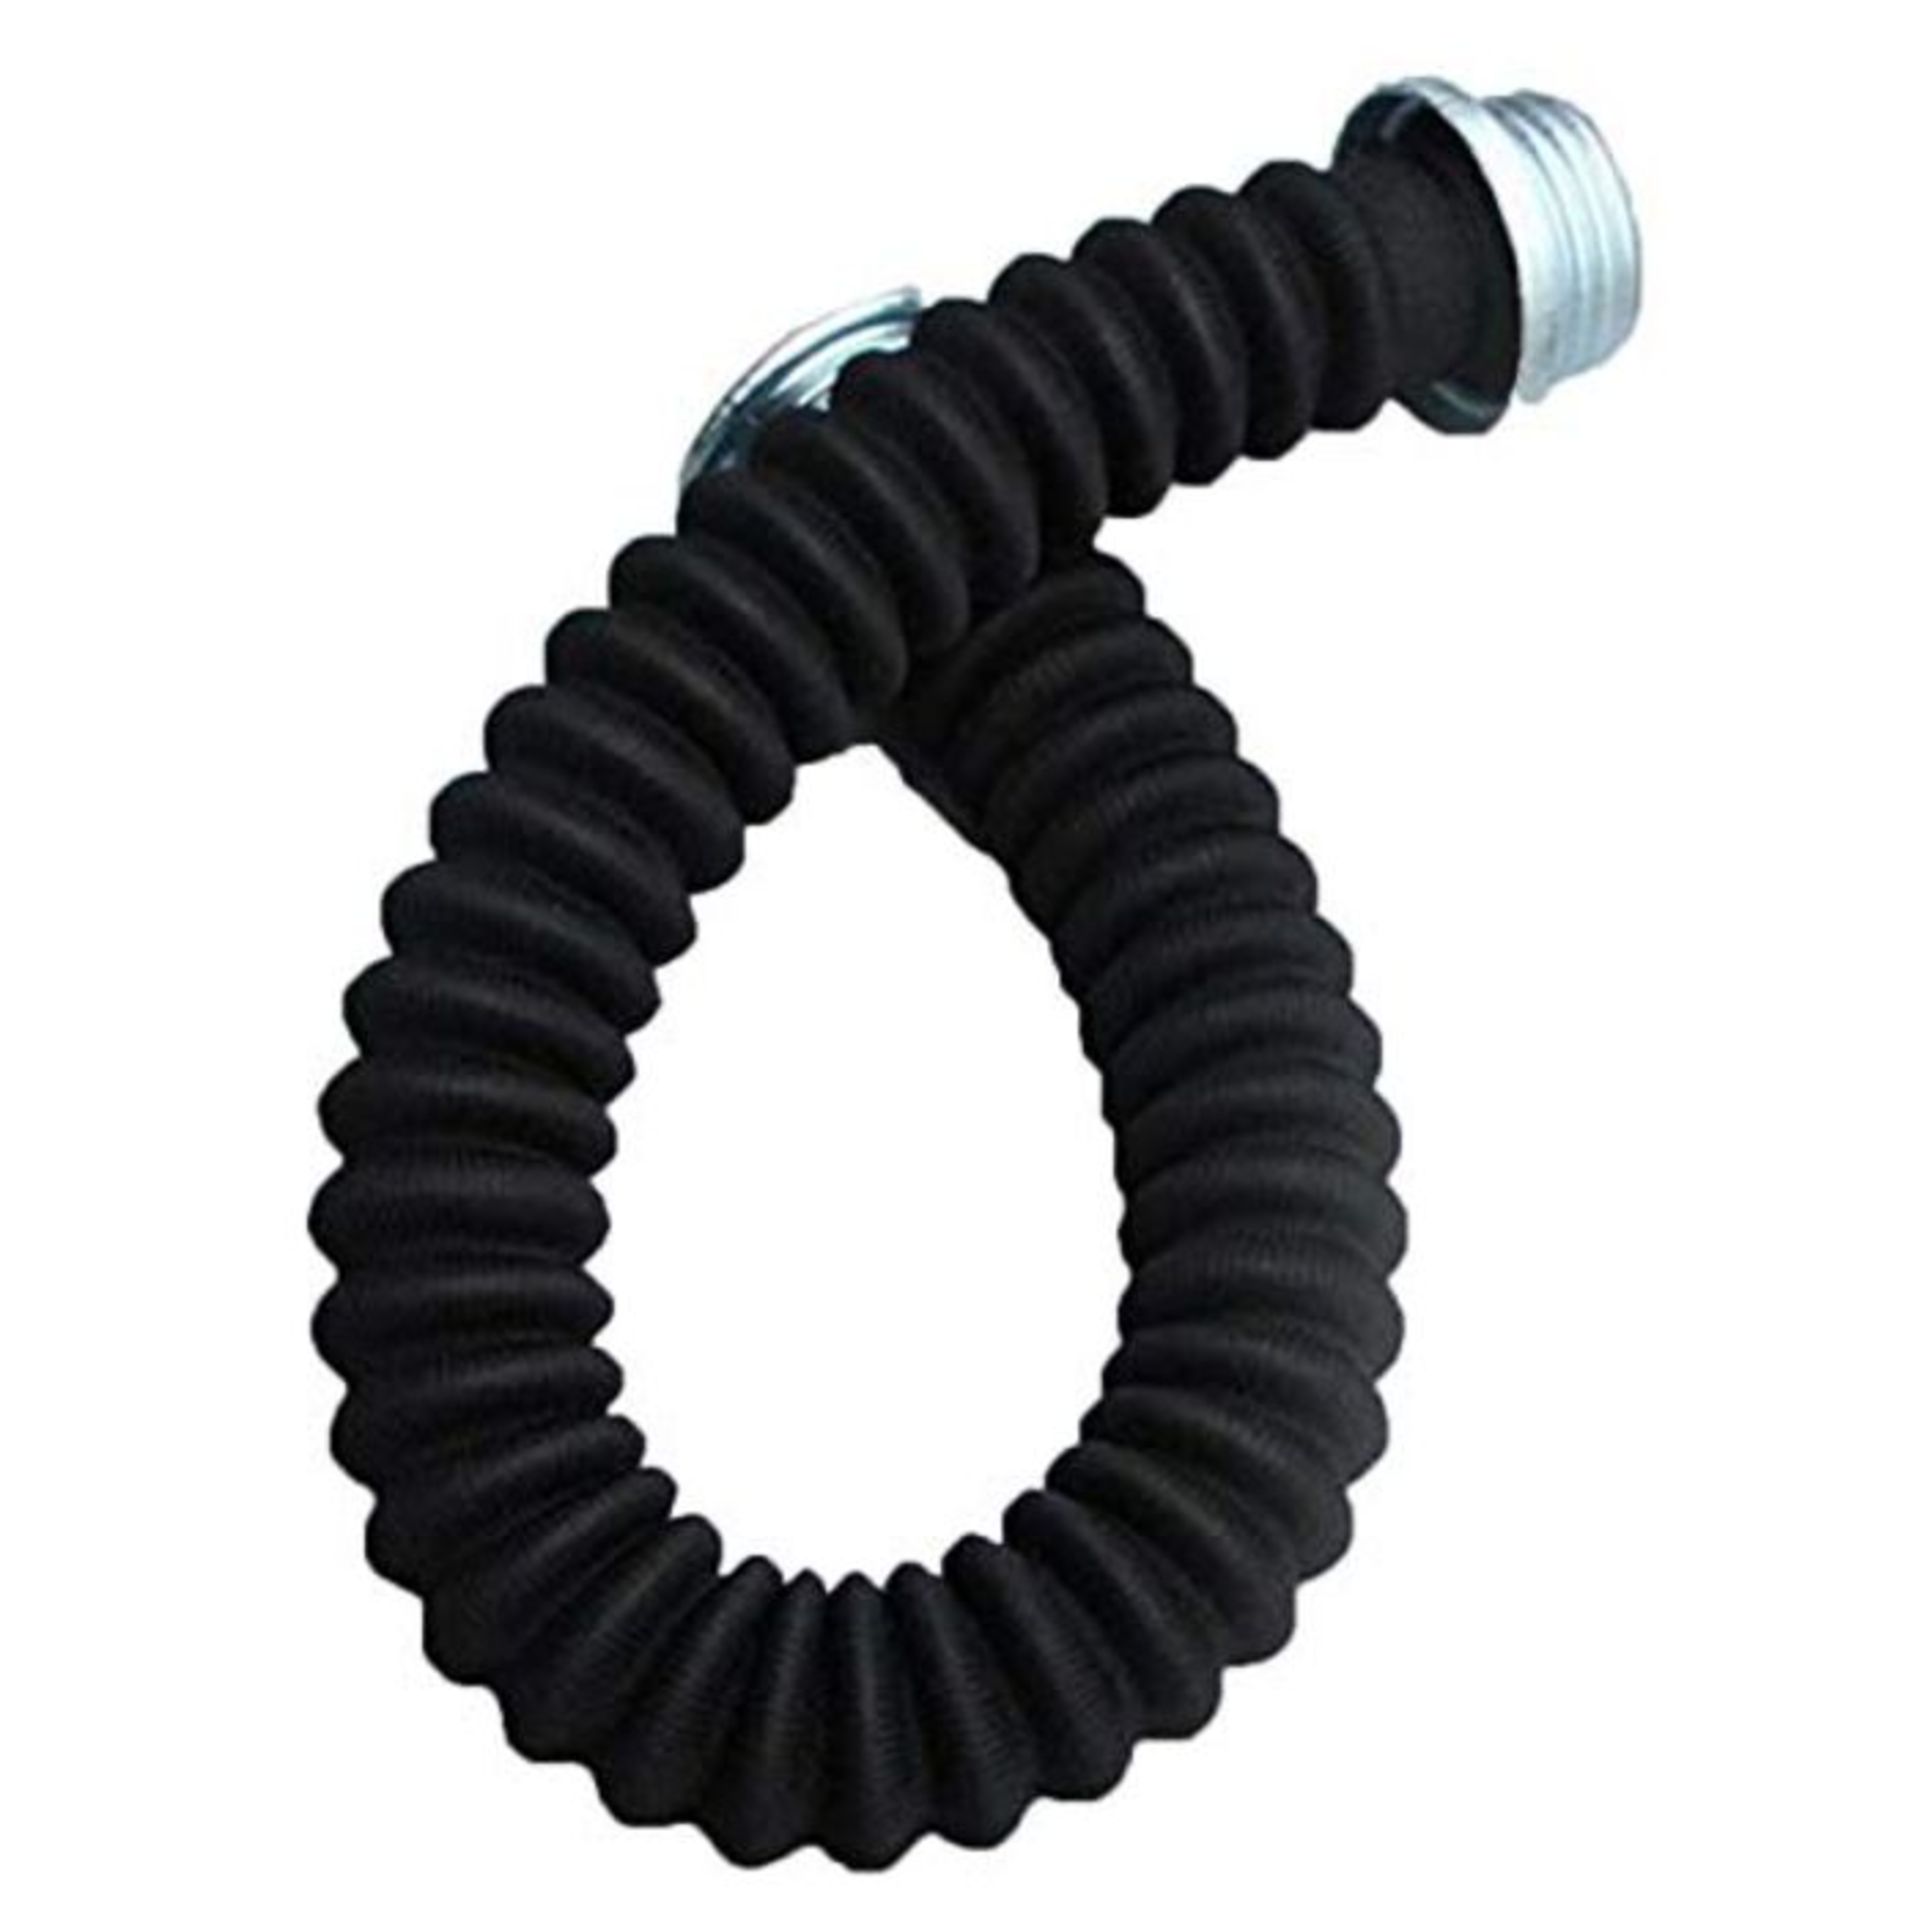 Kungfu Mall 0.5M Rubber Gas Mask Hose Tube Connection Between Gas Mask and Filter Cart